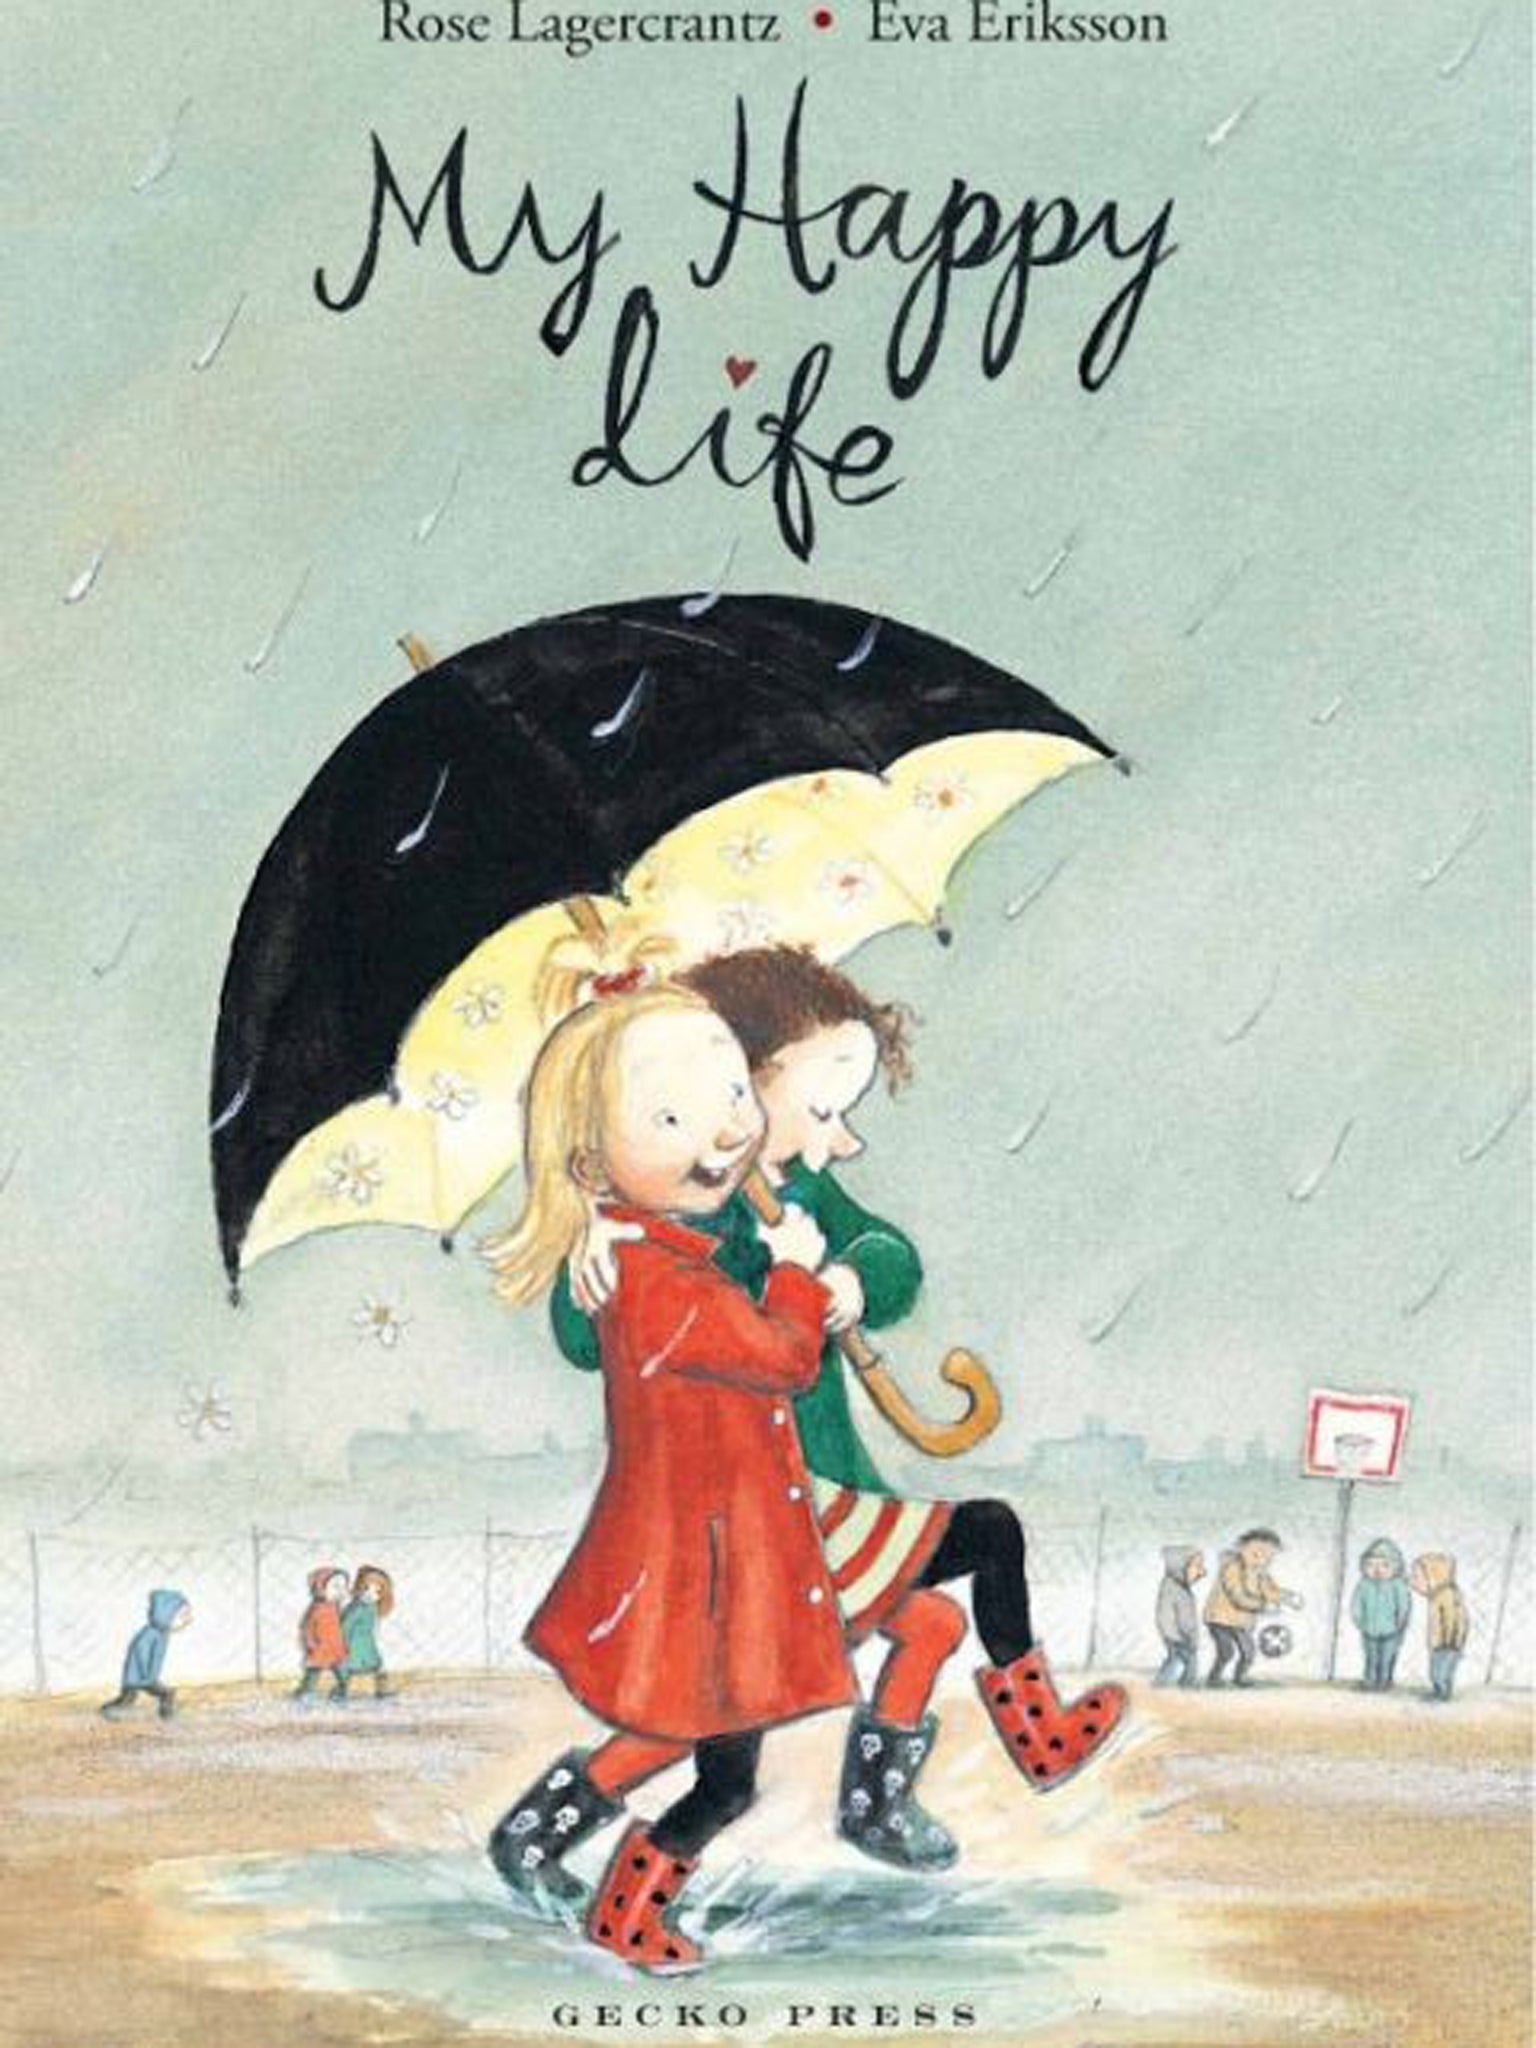 From spy clubs to enchantments: Cover of 'My Happy Life'